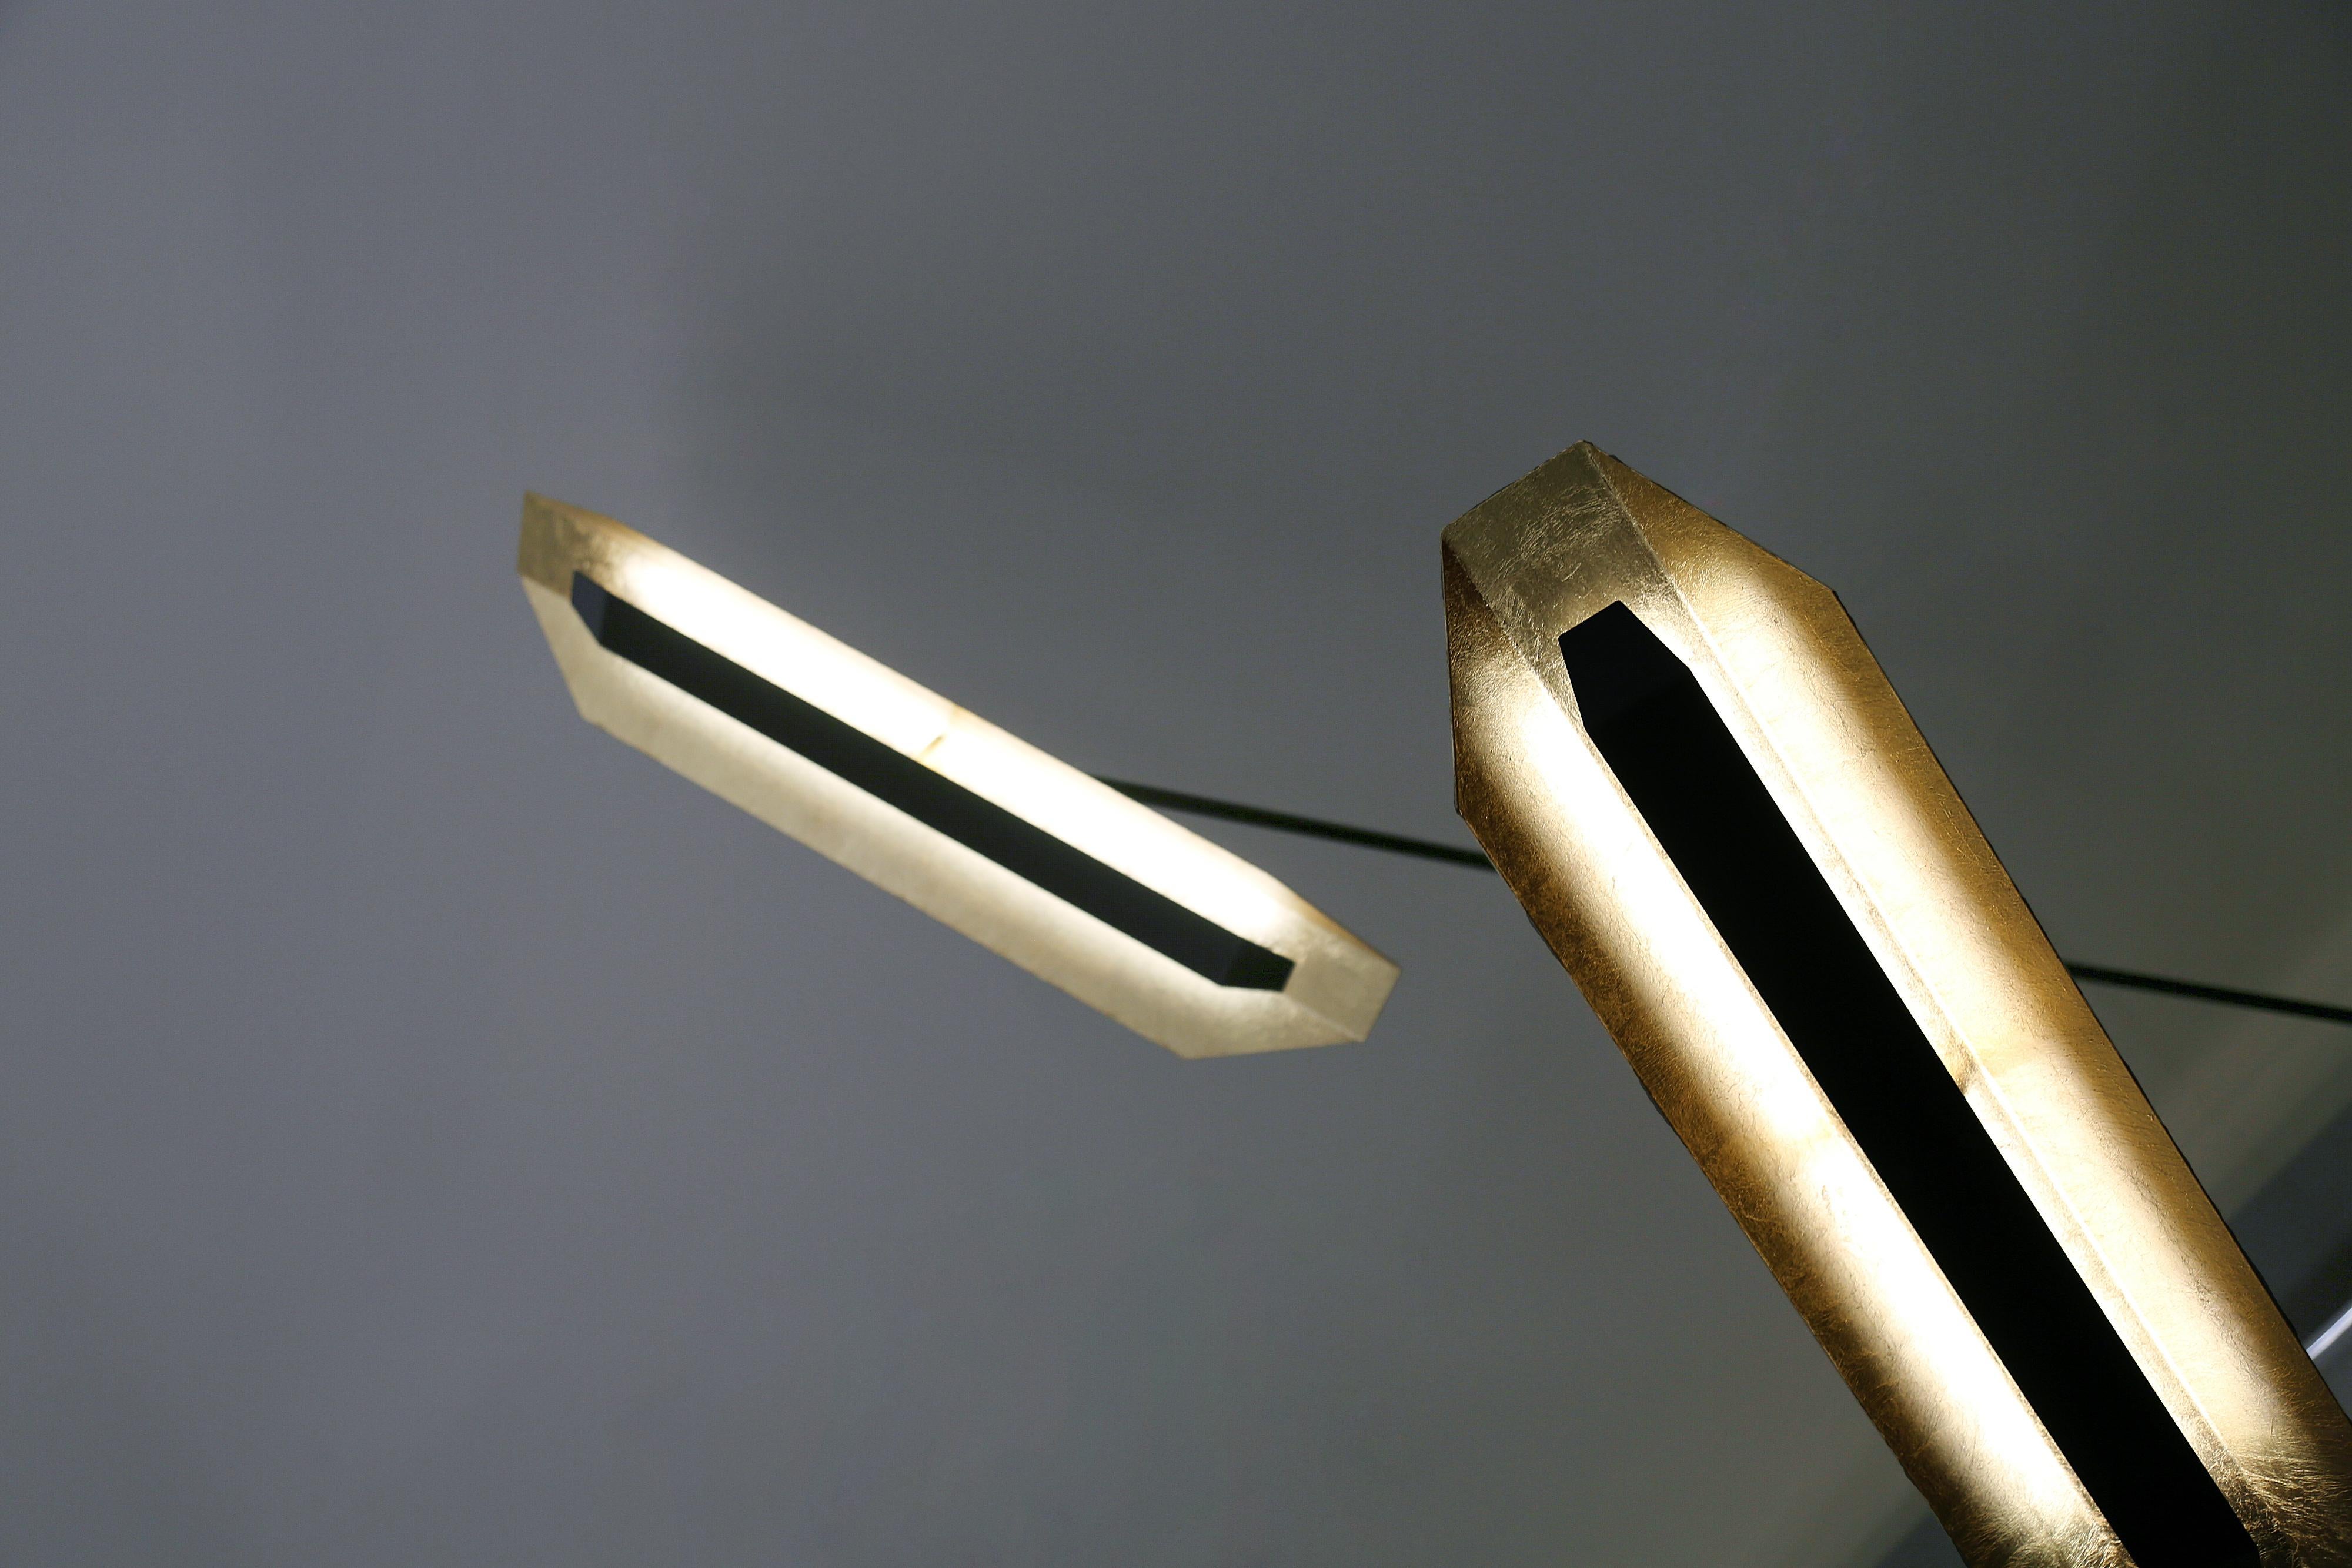 Satellite pendant light pendant by William Guillon and Pierre Mounier
Measures: Height Bespoke
Width up to 100 cm (for one arm)
Black painted steel, 24-carat golden leave
Hand sculpted in France

William Guillon:

William Guillon’s main